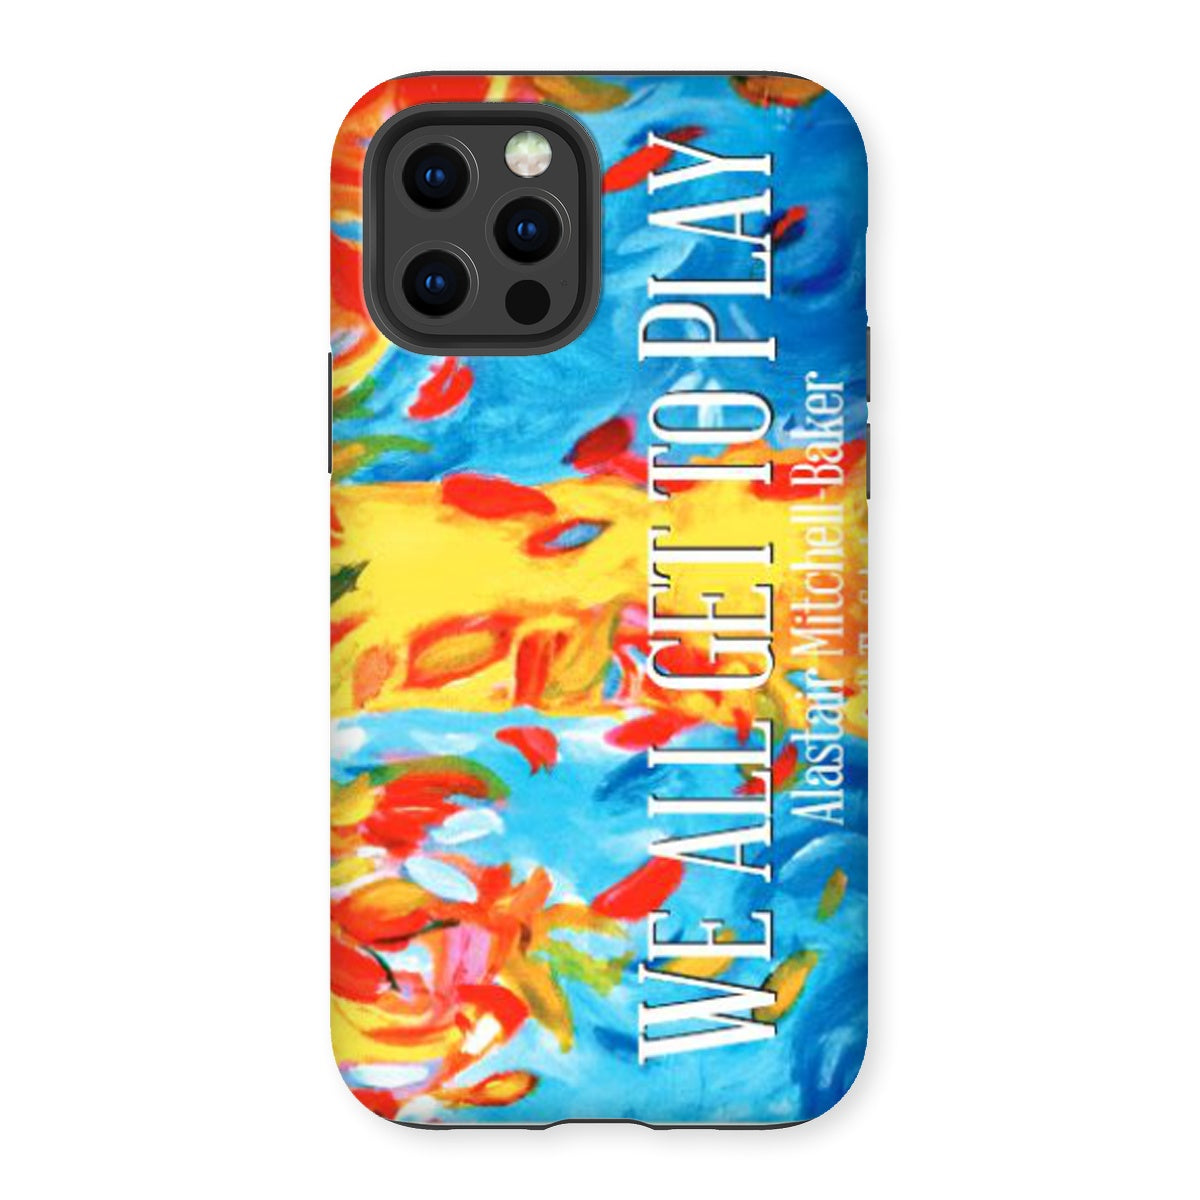 We all Get to Play  Tough Phone Case